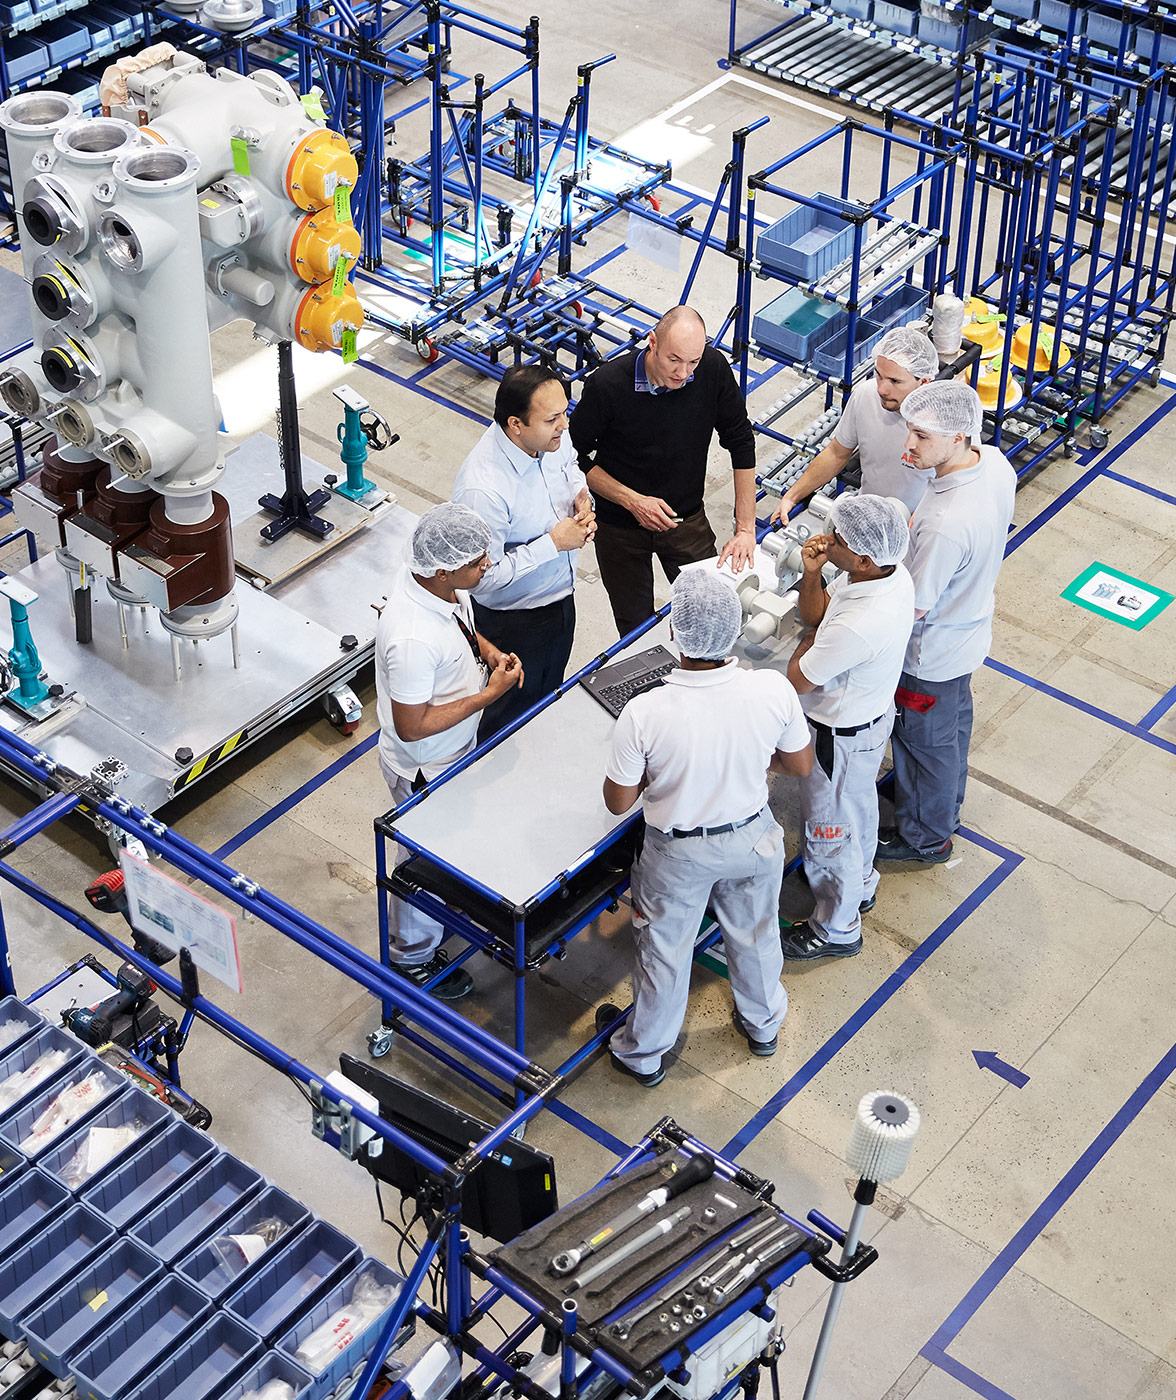 ABB employees standing in a production plant and discussing (photo)